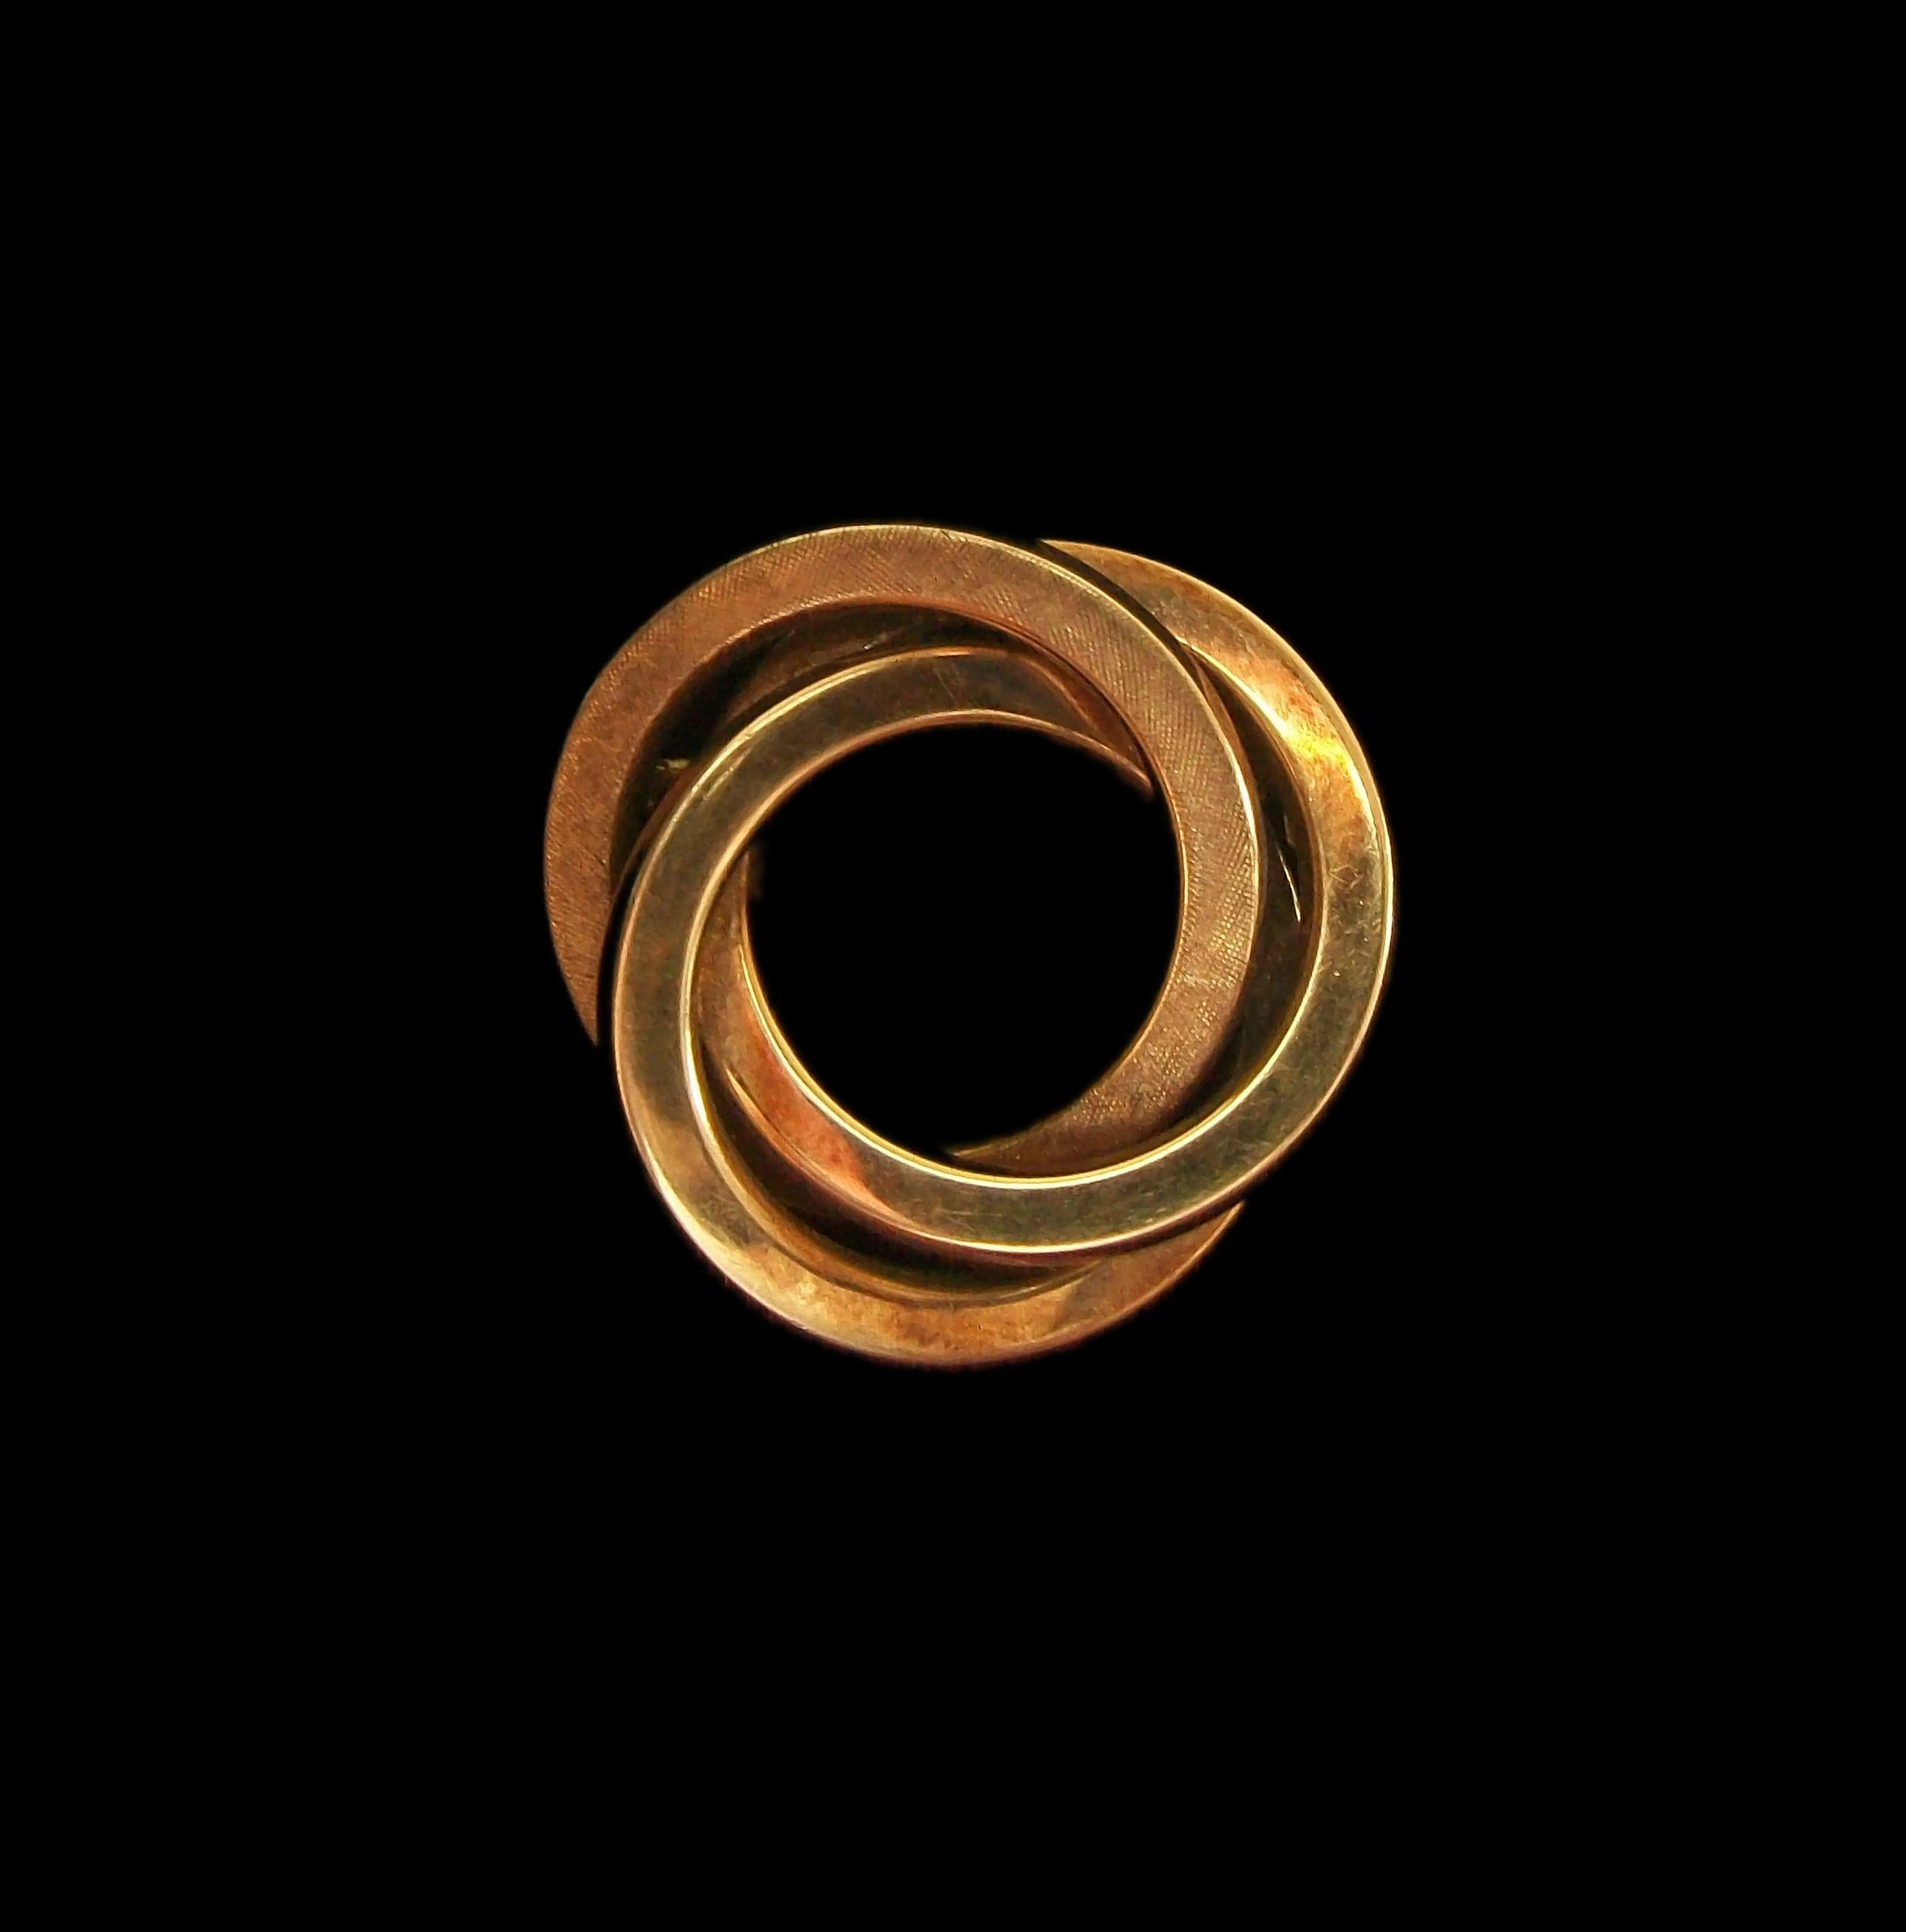 CARL CHRISTIAN FJERDINGSTAD (1891-1968) - Art Deco 14K/585 yellow gold circle brooch or pin - one circle with engine turned finish - smooth finish to the other two circles - finest quality workmanship and detail - completely hand made - 585 gold